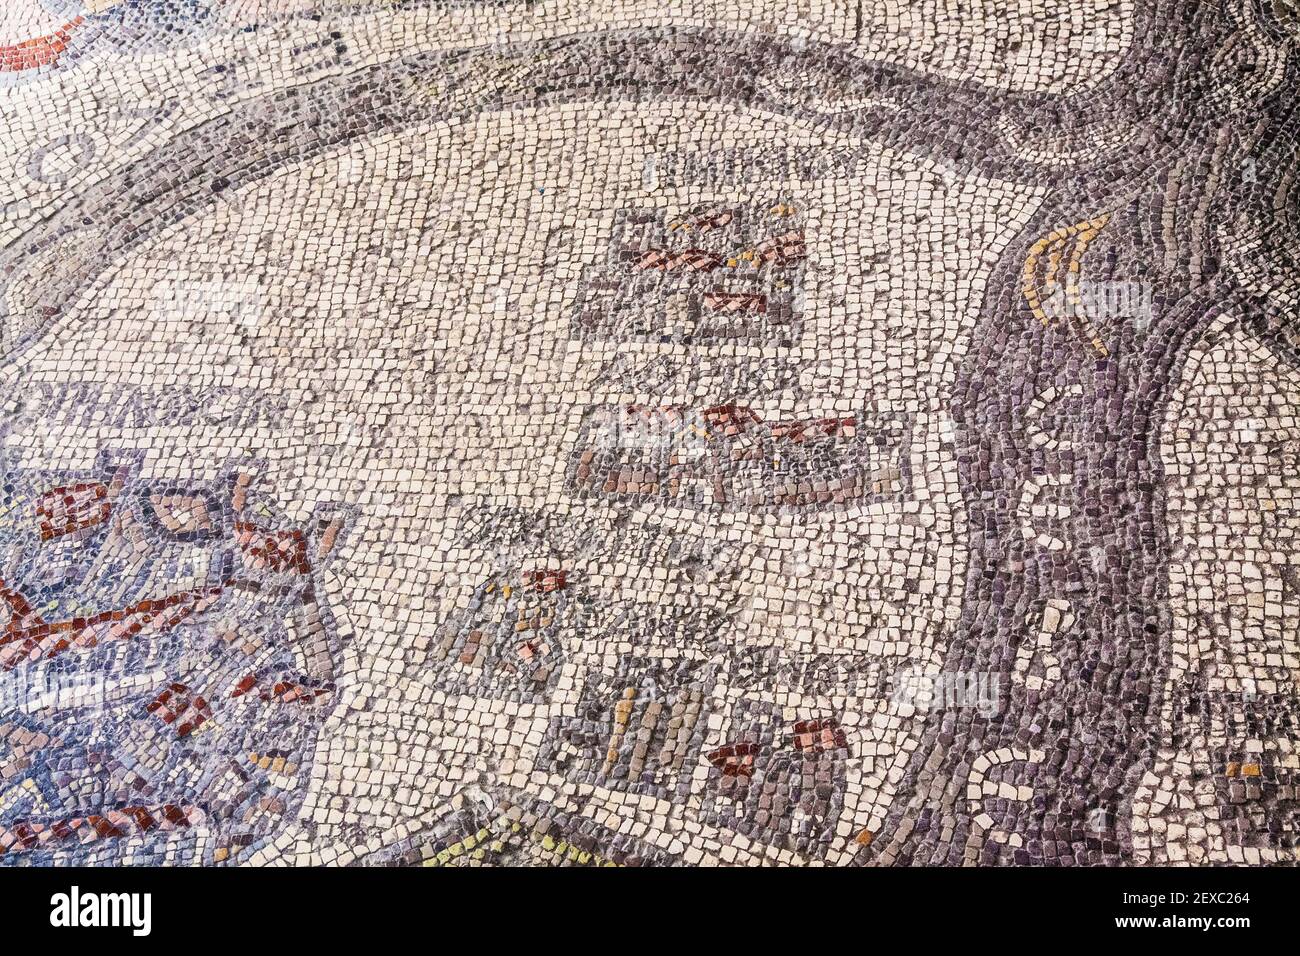 Part of the famous mosaic map of the Holy Land on the floor of St.George's Church in Madaba, Jordan. Stock Photo